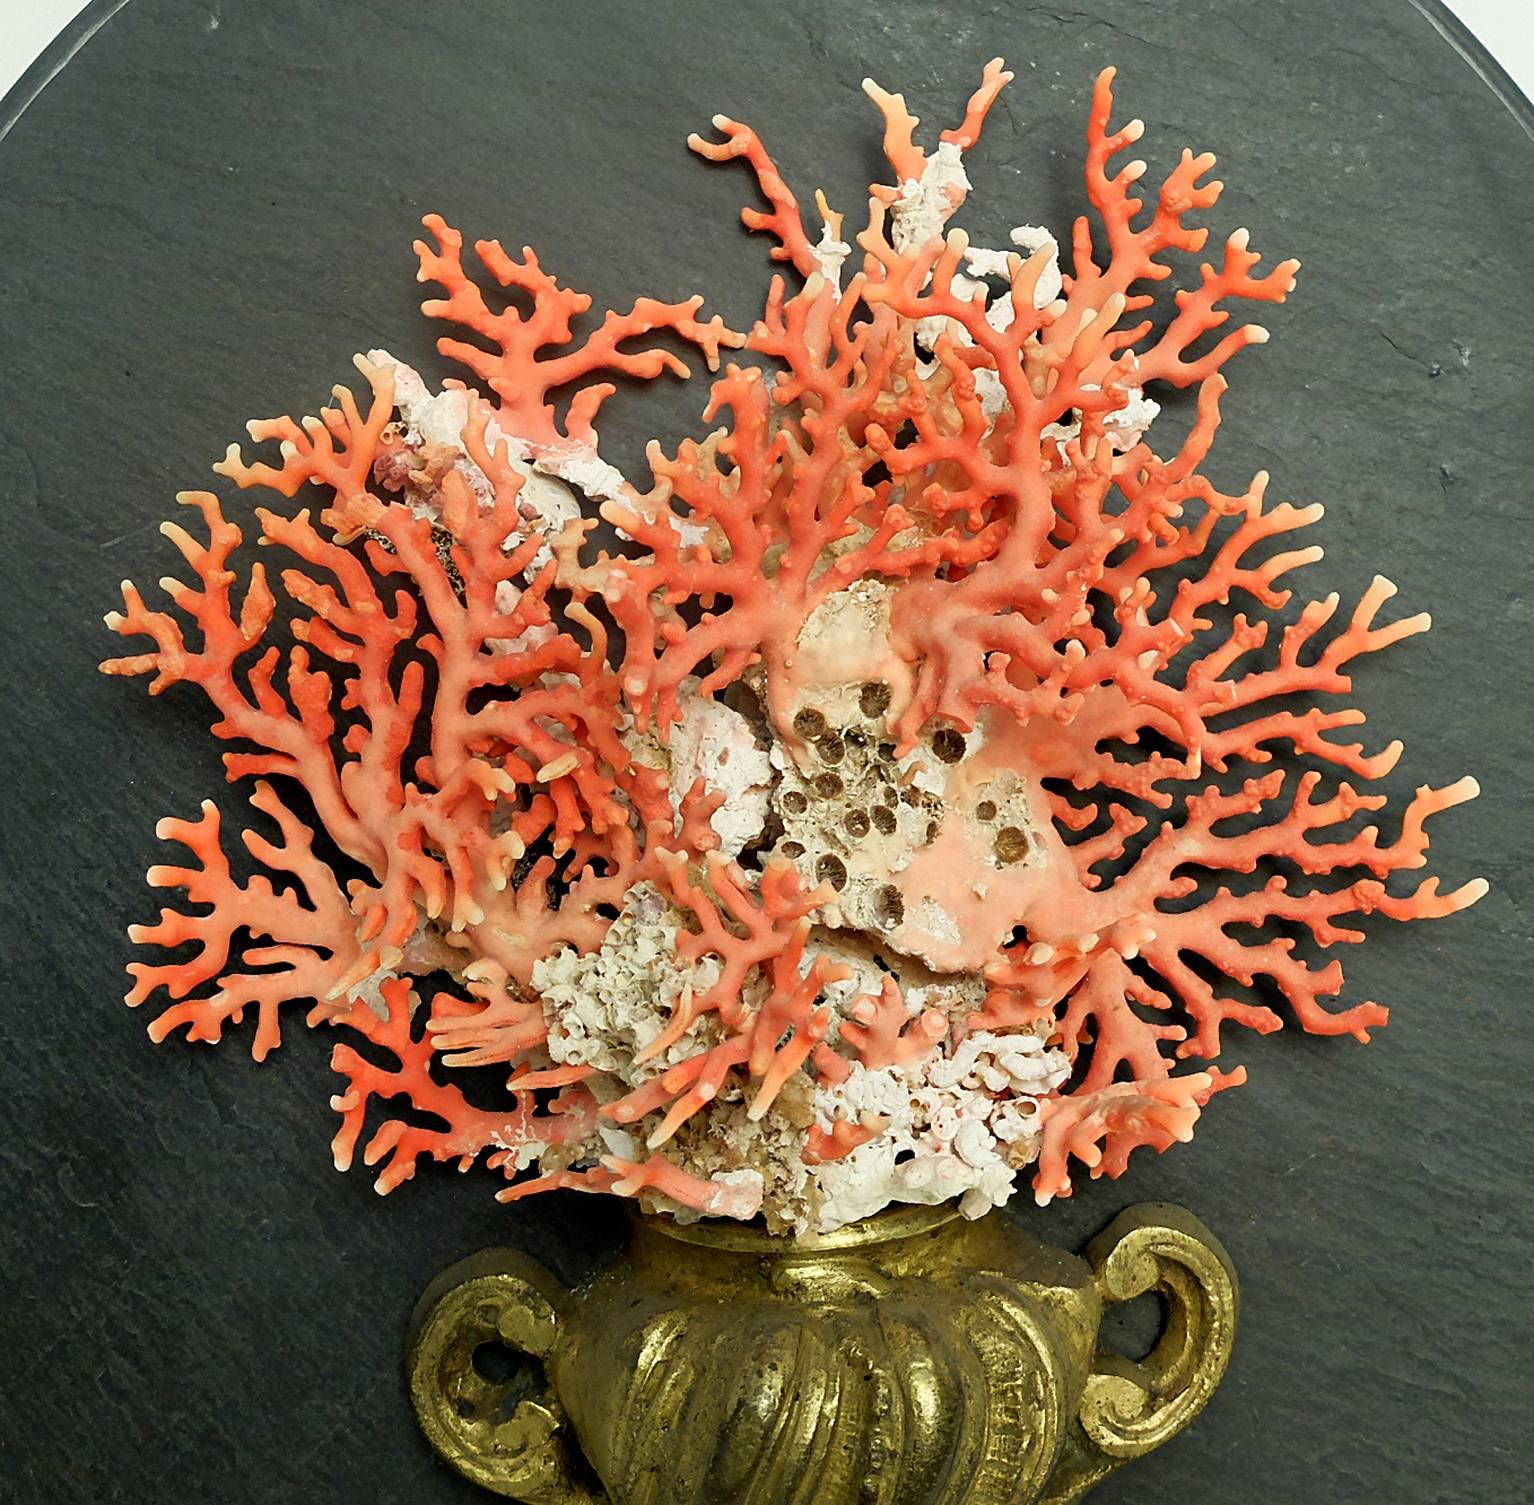 A Naturalia mineral specimen cut off branches of Mediterranean coral mounted on an early golden painted wooden and bronze 18th century base depicting a vase. The coral sample fan shape is mounted over a slice of slate of oval shape, Italy, circa